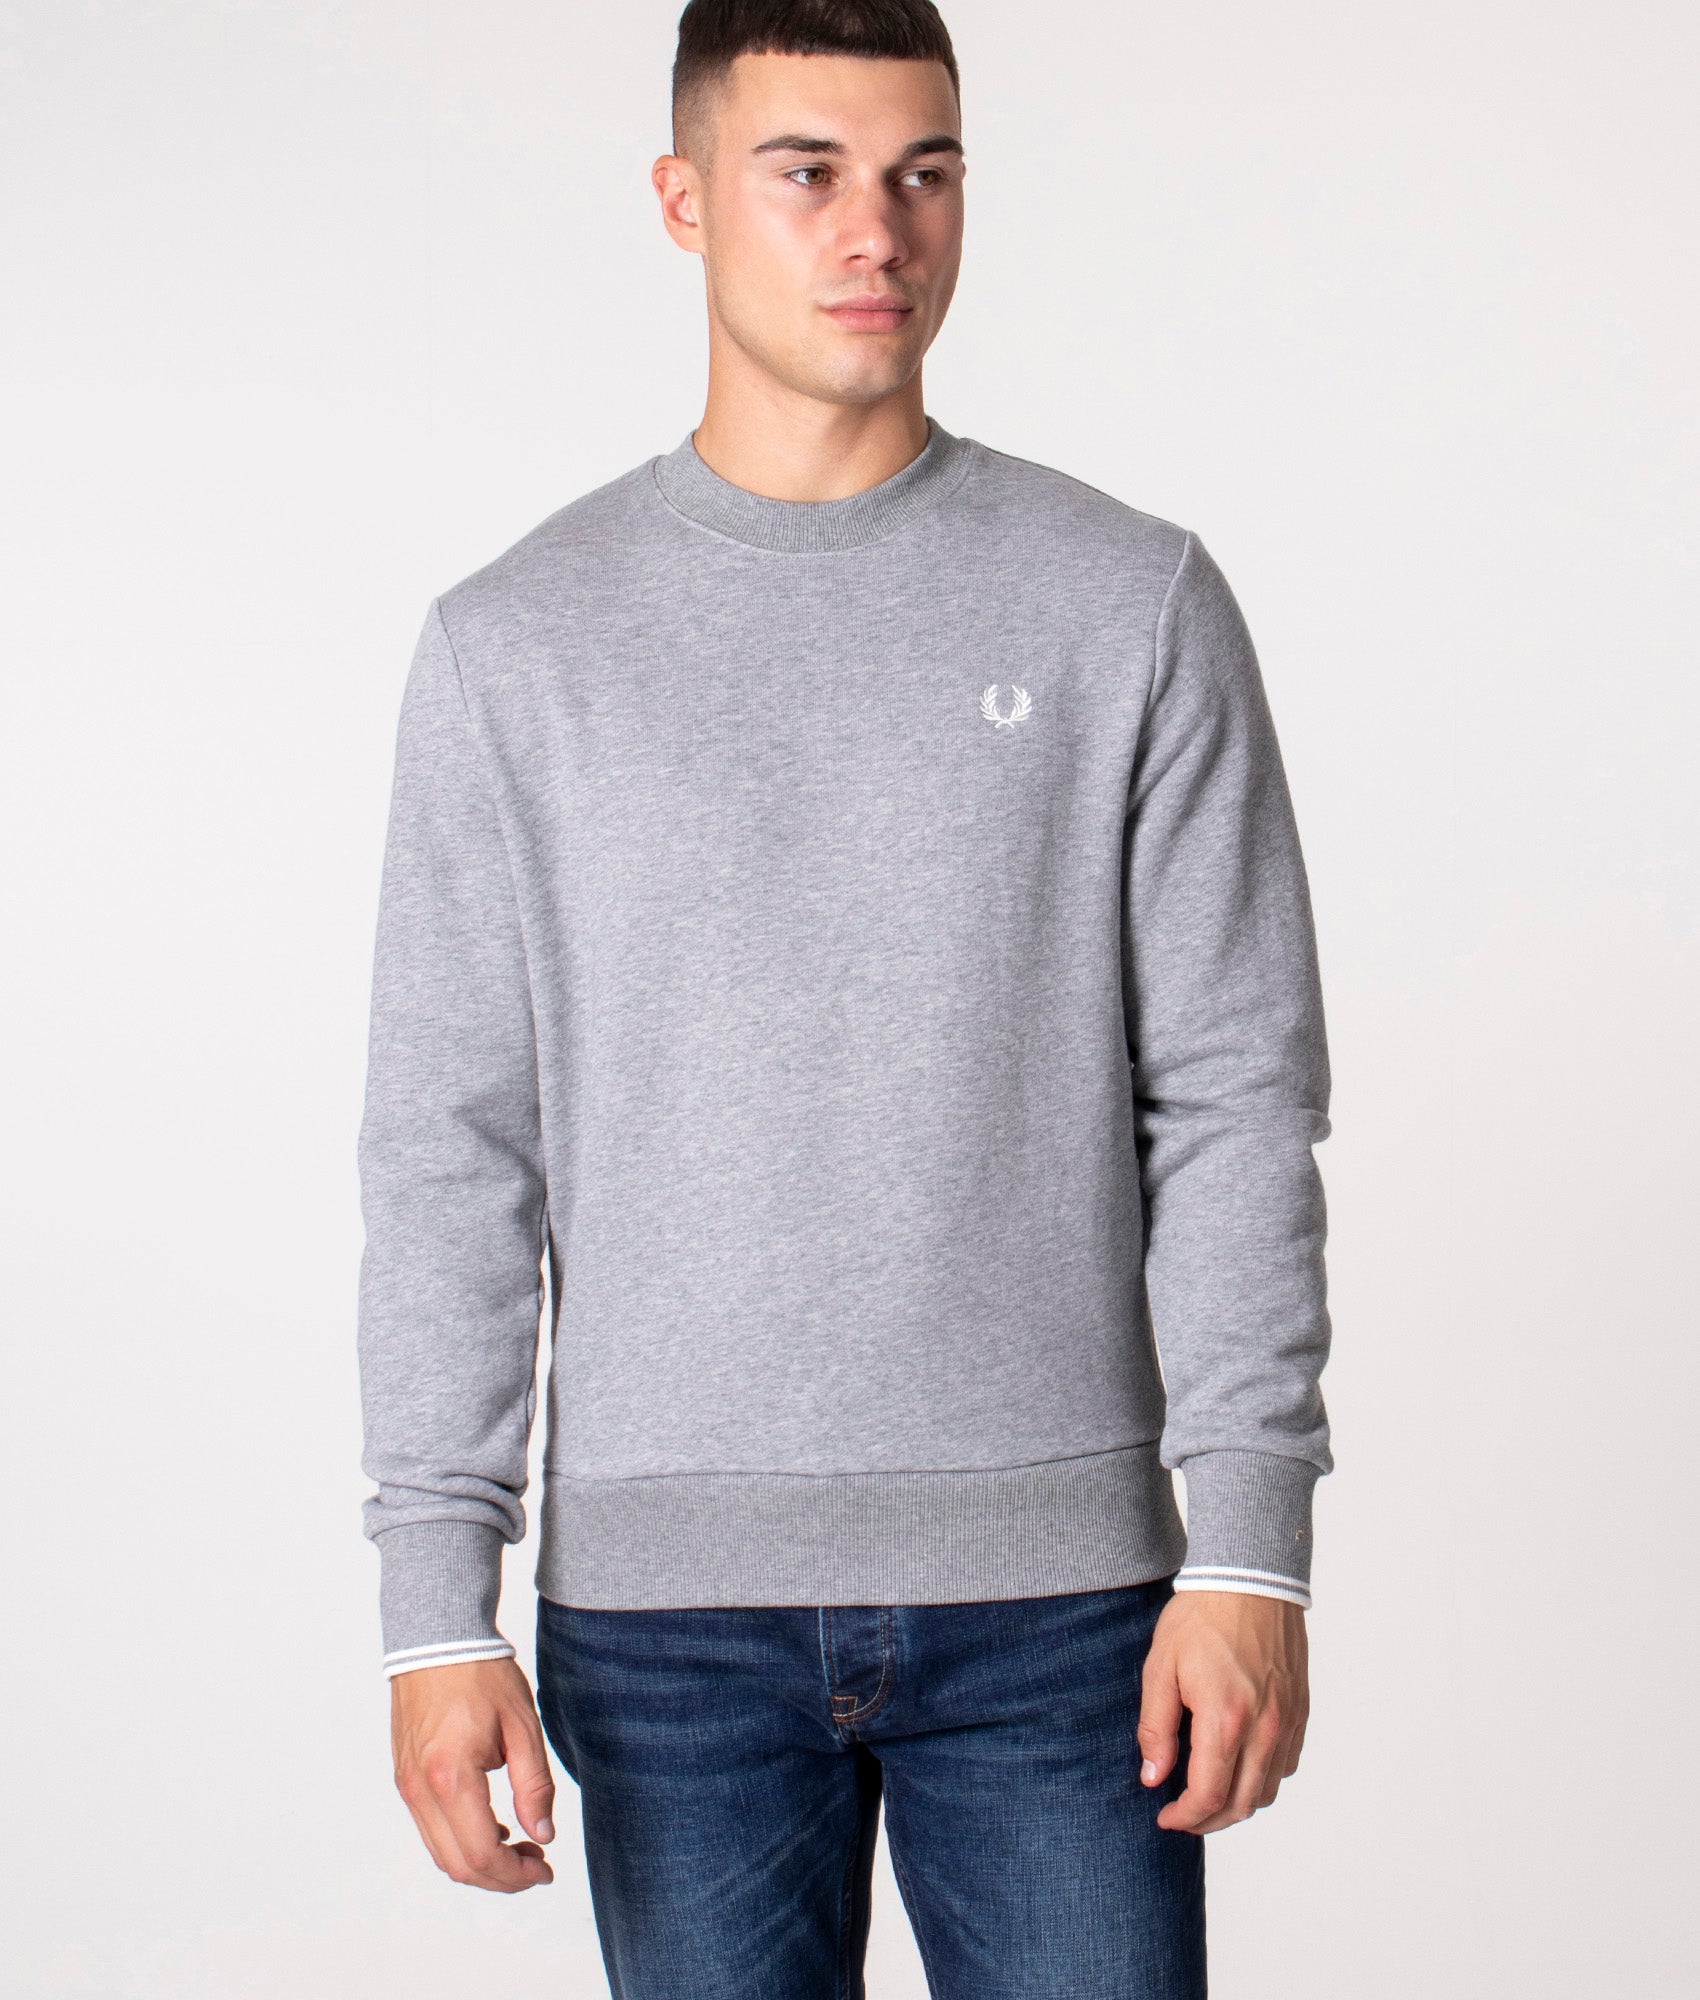 Fred Perry Mens Crew Neck Sweatshirt - Colour: 420 Steel Marl - Size: XL